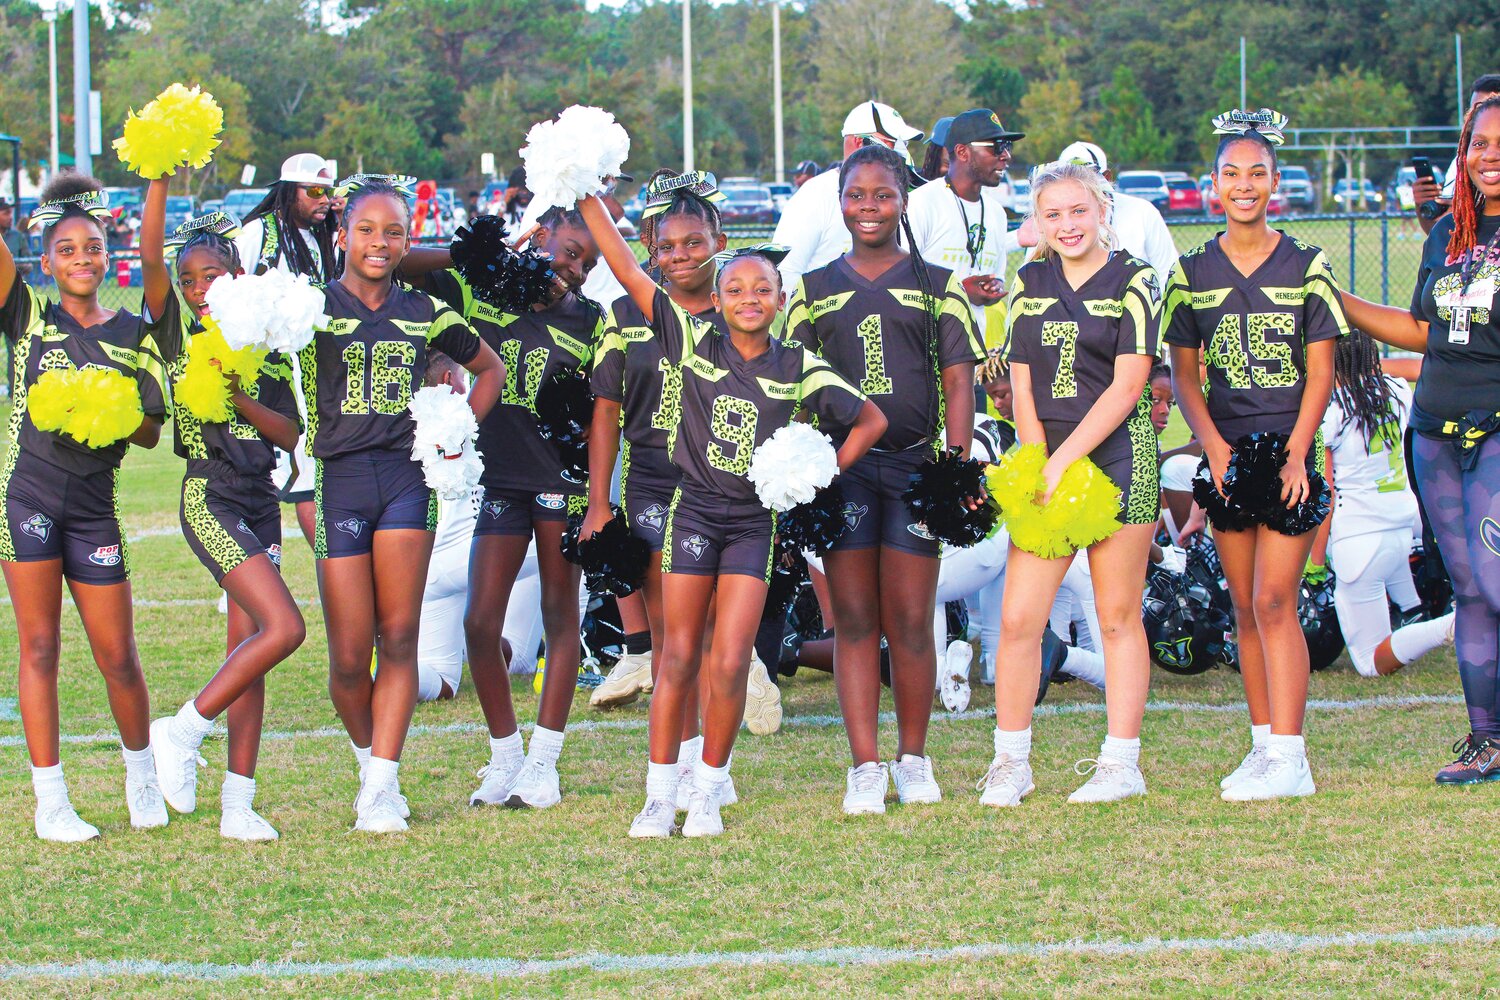 Oakleaf Renegades cheerleaders get their smiles on in the post-game huddle with the team after 21-0 playoff win over Grand Park propelled the team to the Division championship next week at Lake Mary High with a shot at Pop Warner National Championship two weeks later.